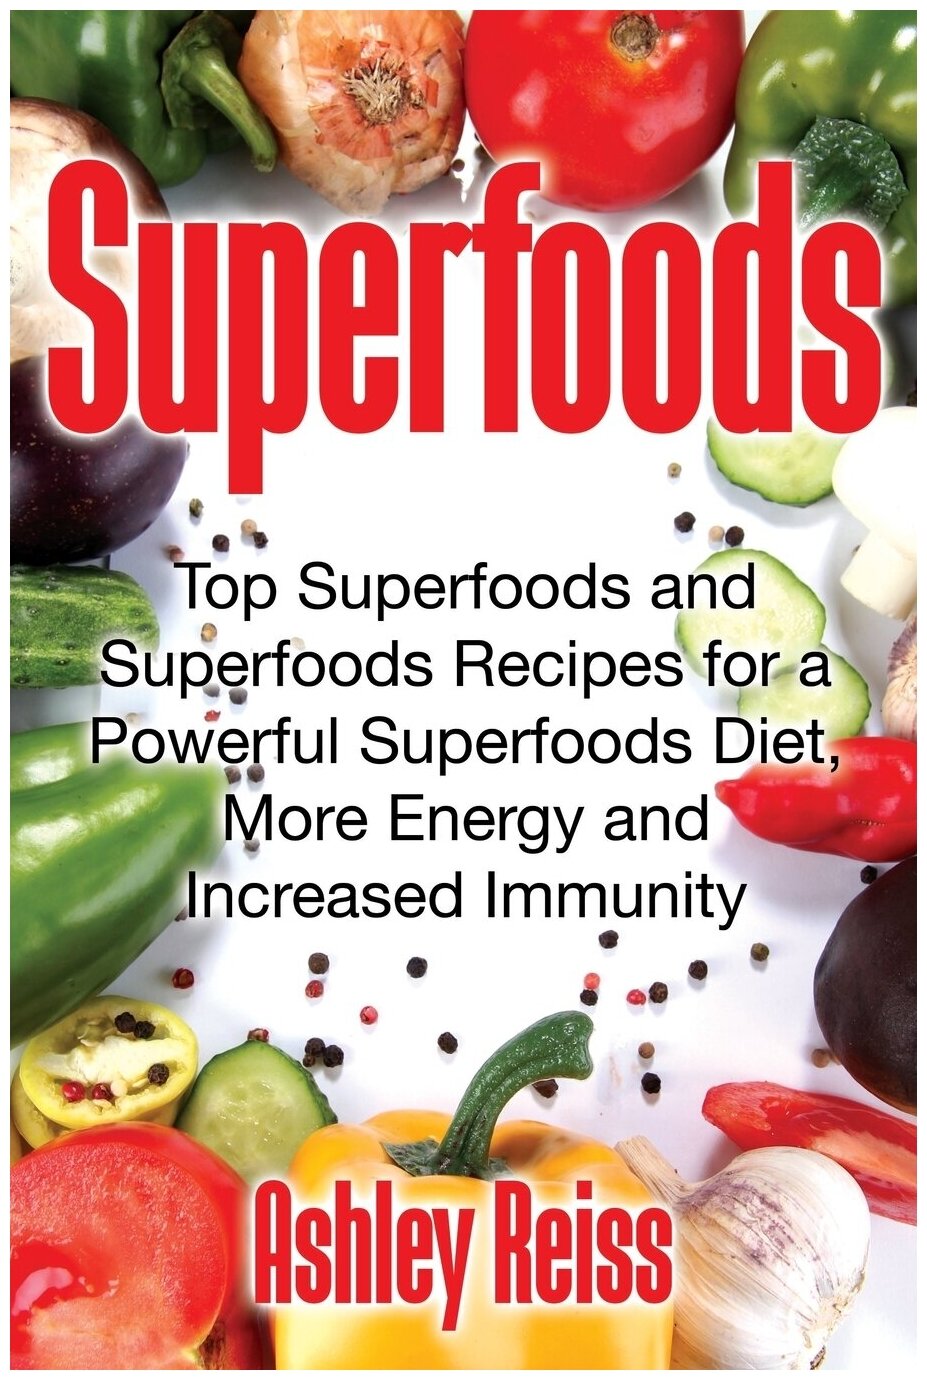 Superfoods. Top Superfoods and Superfoods Recipes for a Powerful Superfoods Diet, More Energy and Increased Immunity